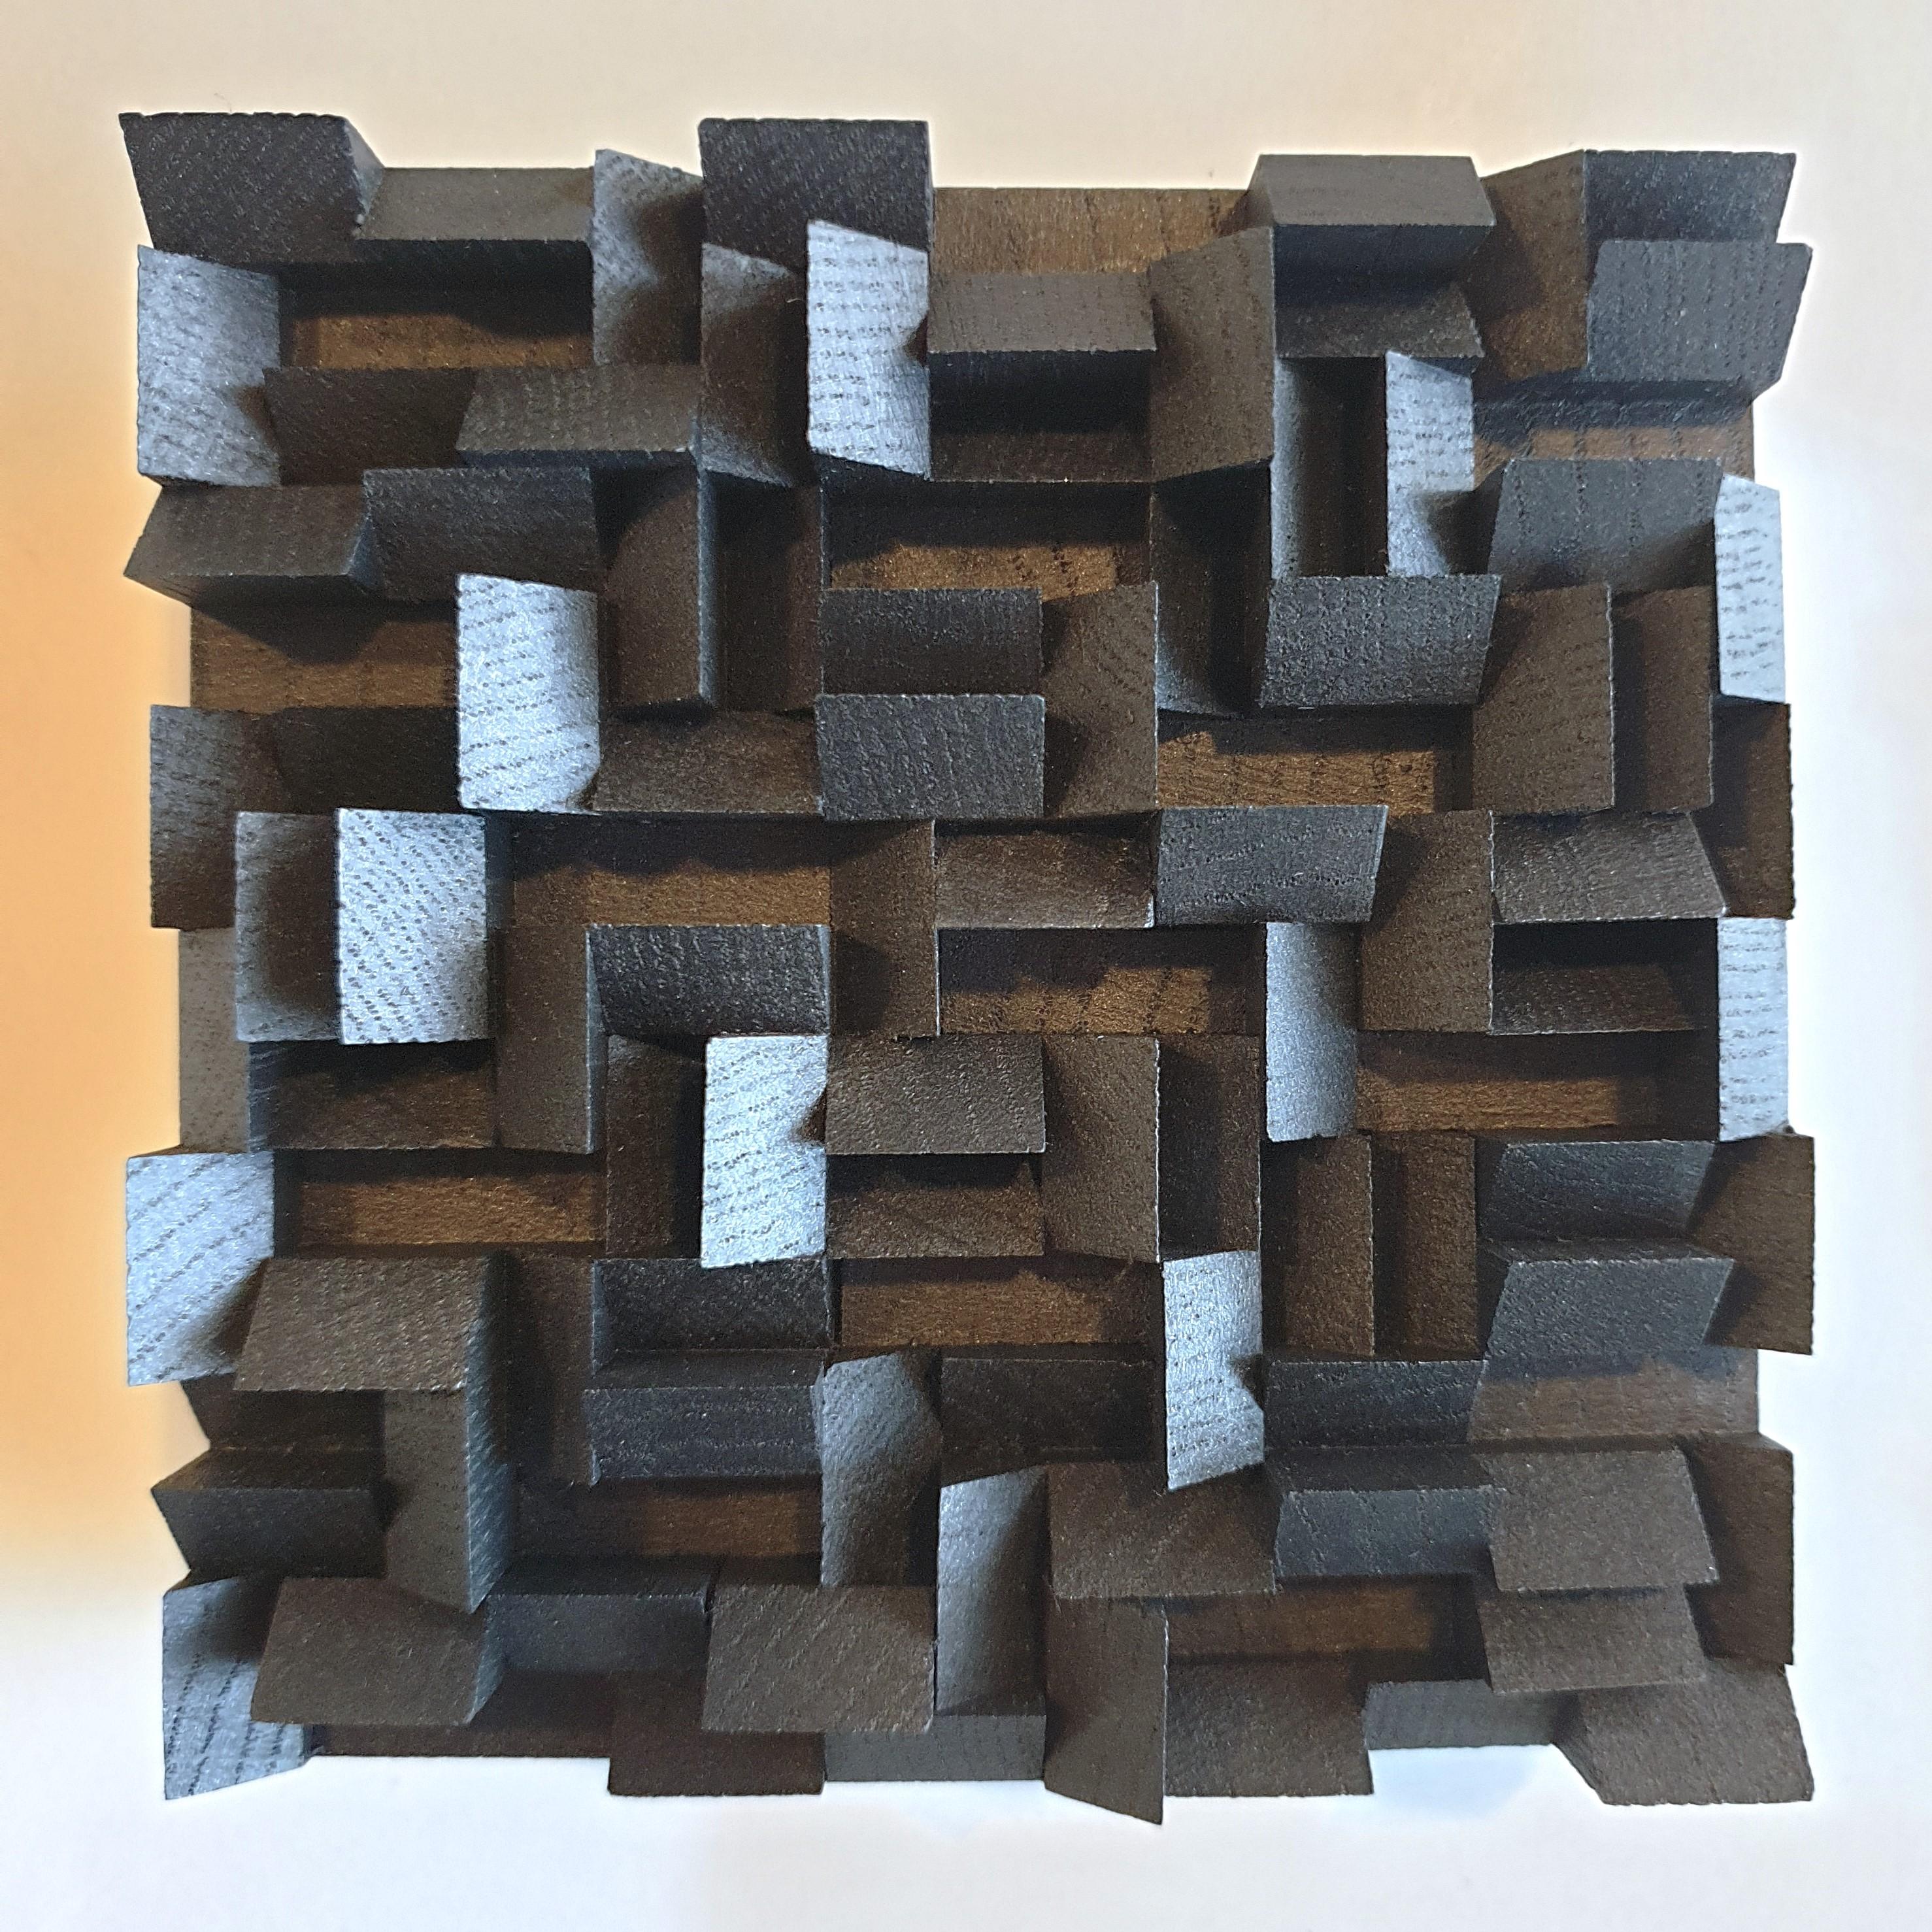 This Variation triptyque wall sculpture consists of three different small size contemporary modern abstract wall sculptures by French-Dutch artist Olivier Julia. These wall sculptures are each made individually from carefully cut, glued and sanded